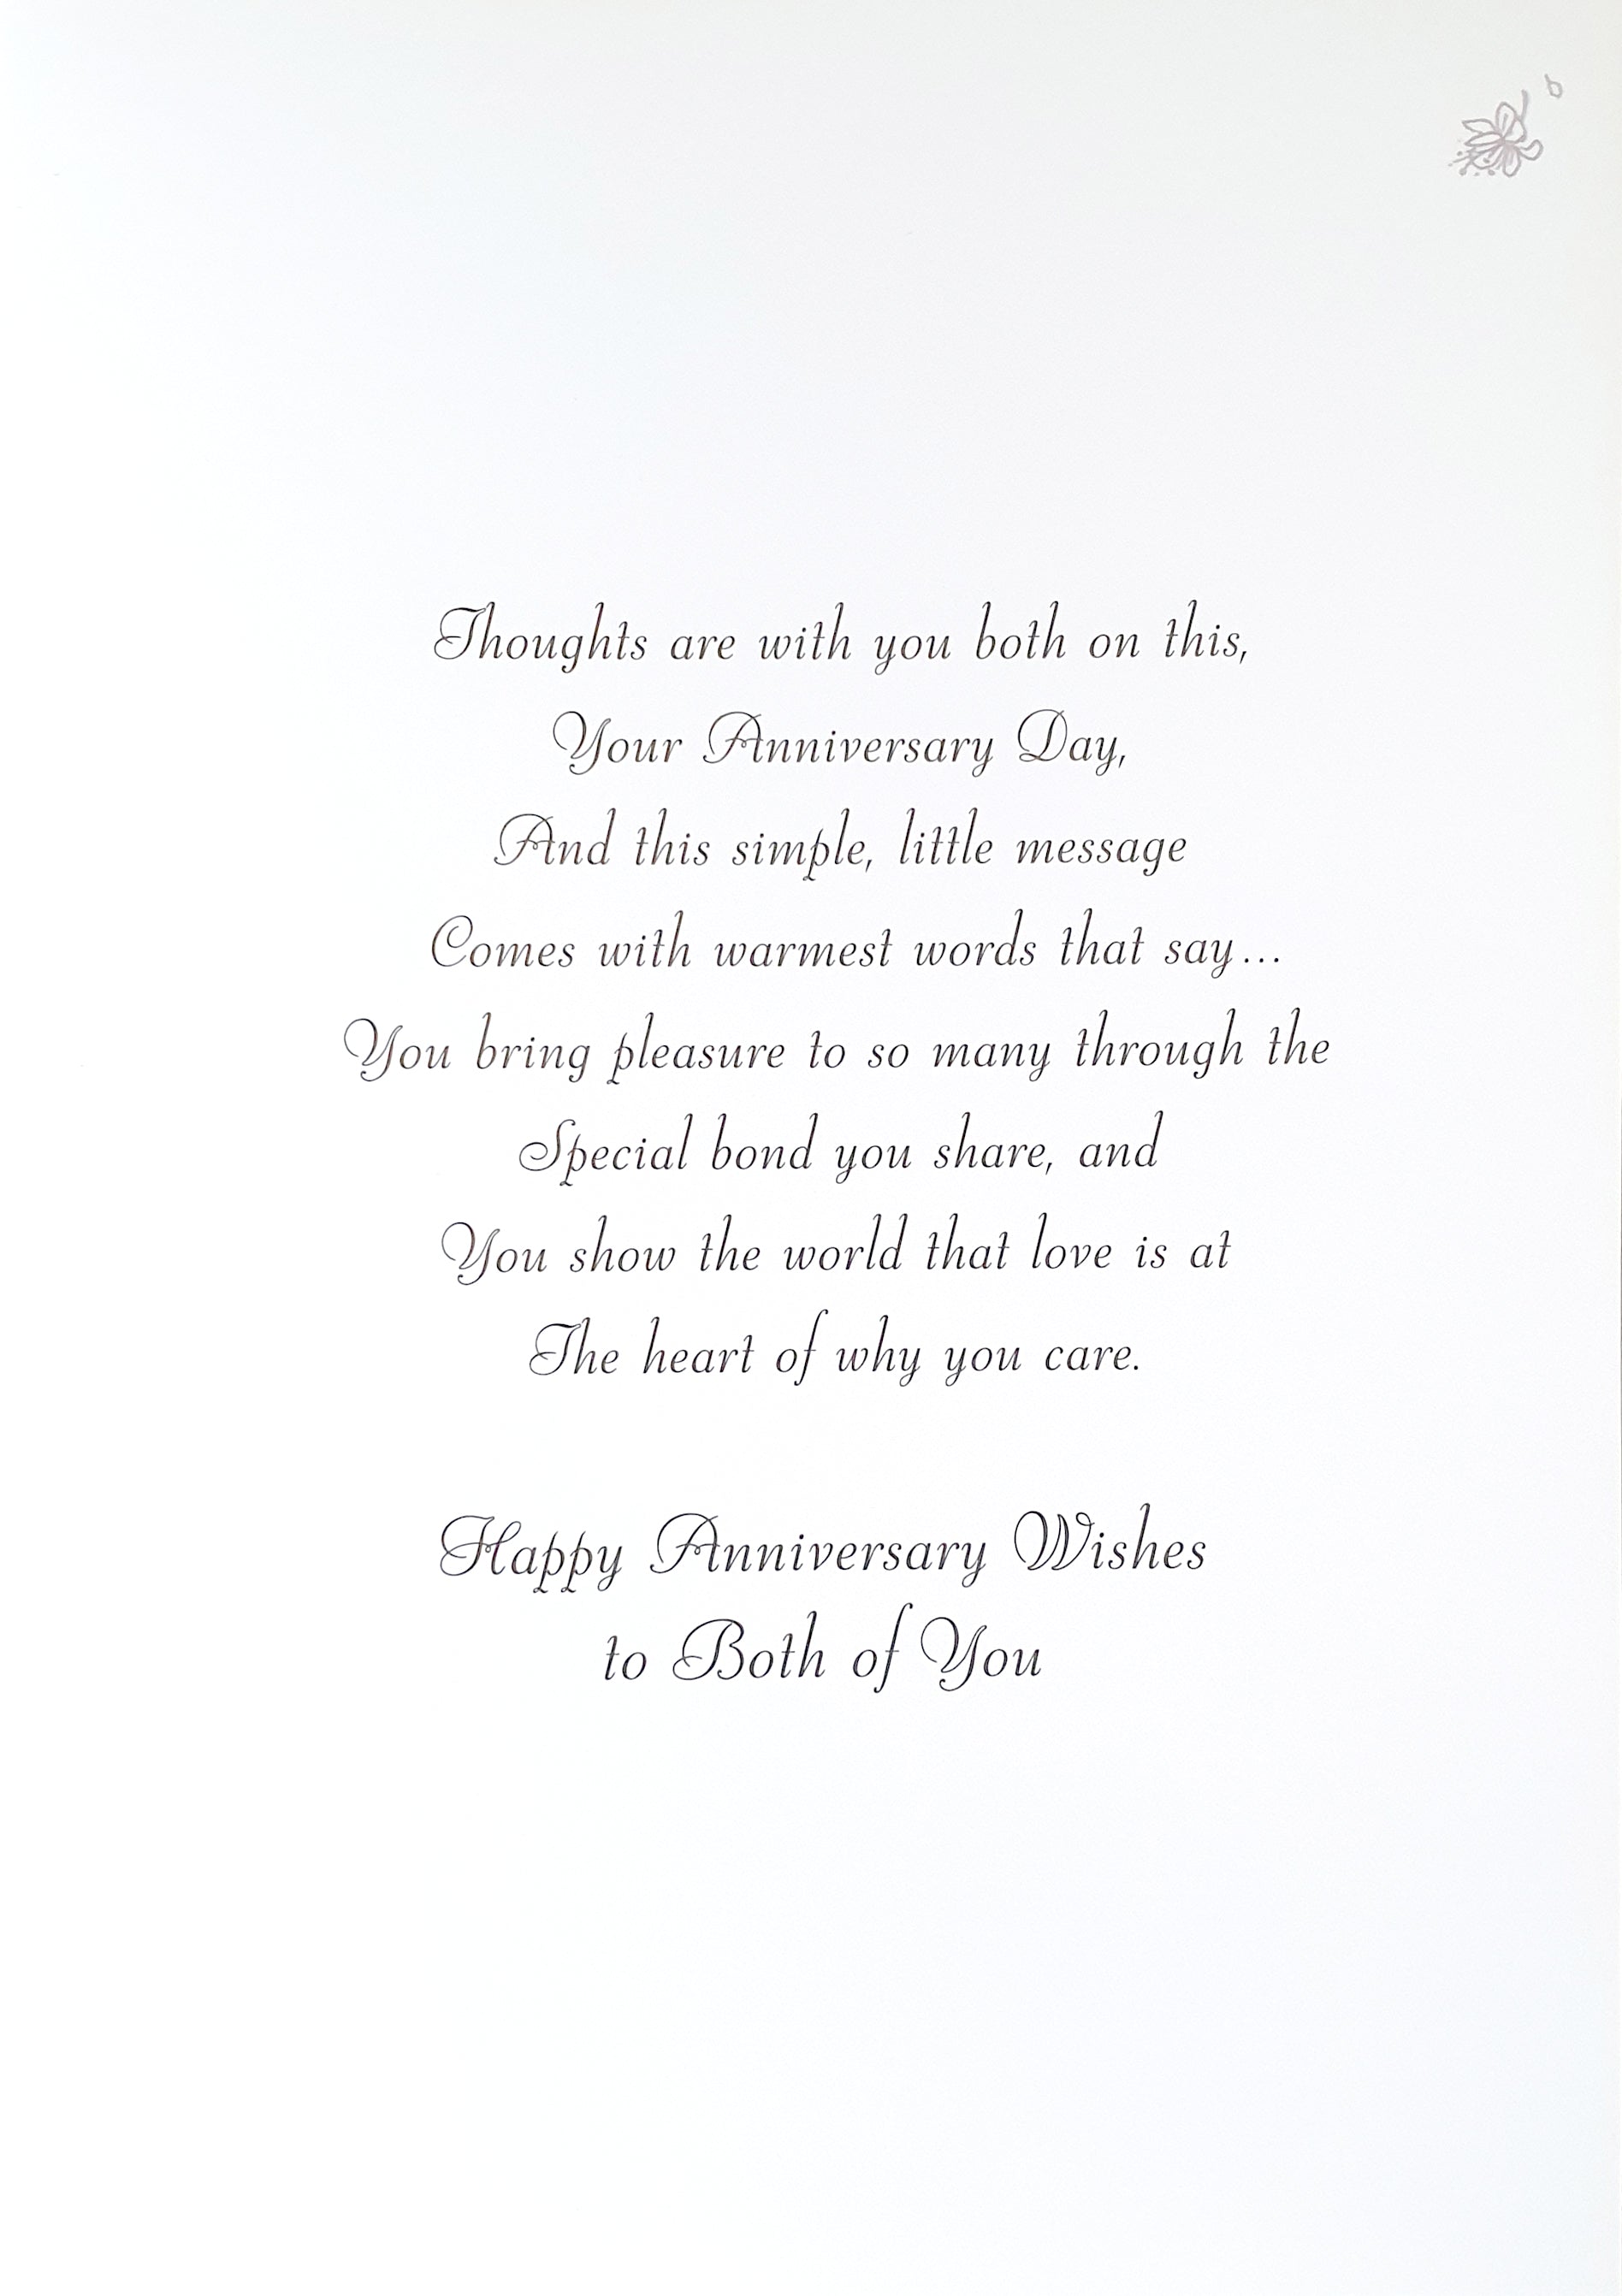 Special Sister and Brother-in-Law Wedding Anniversary Card